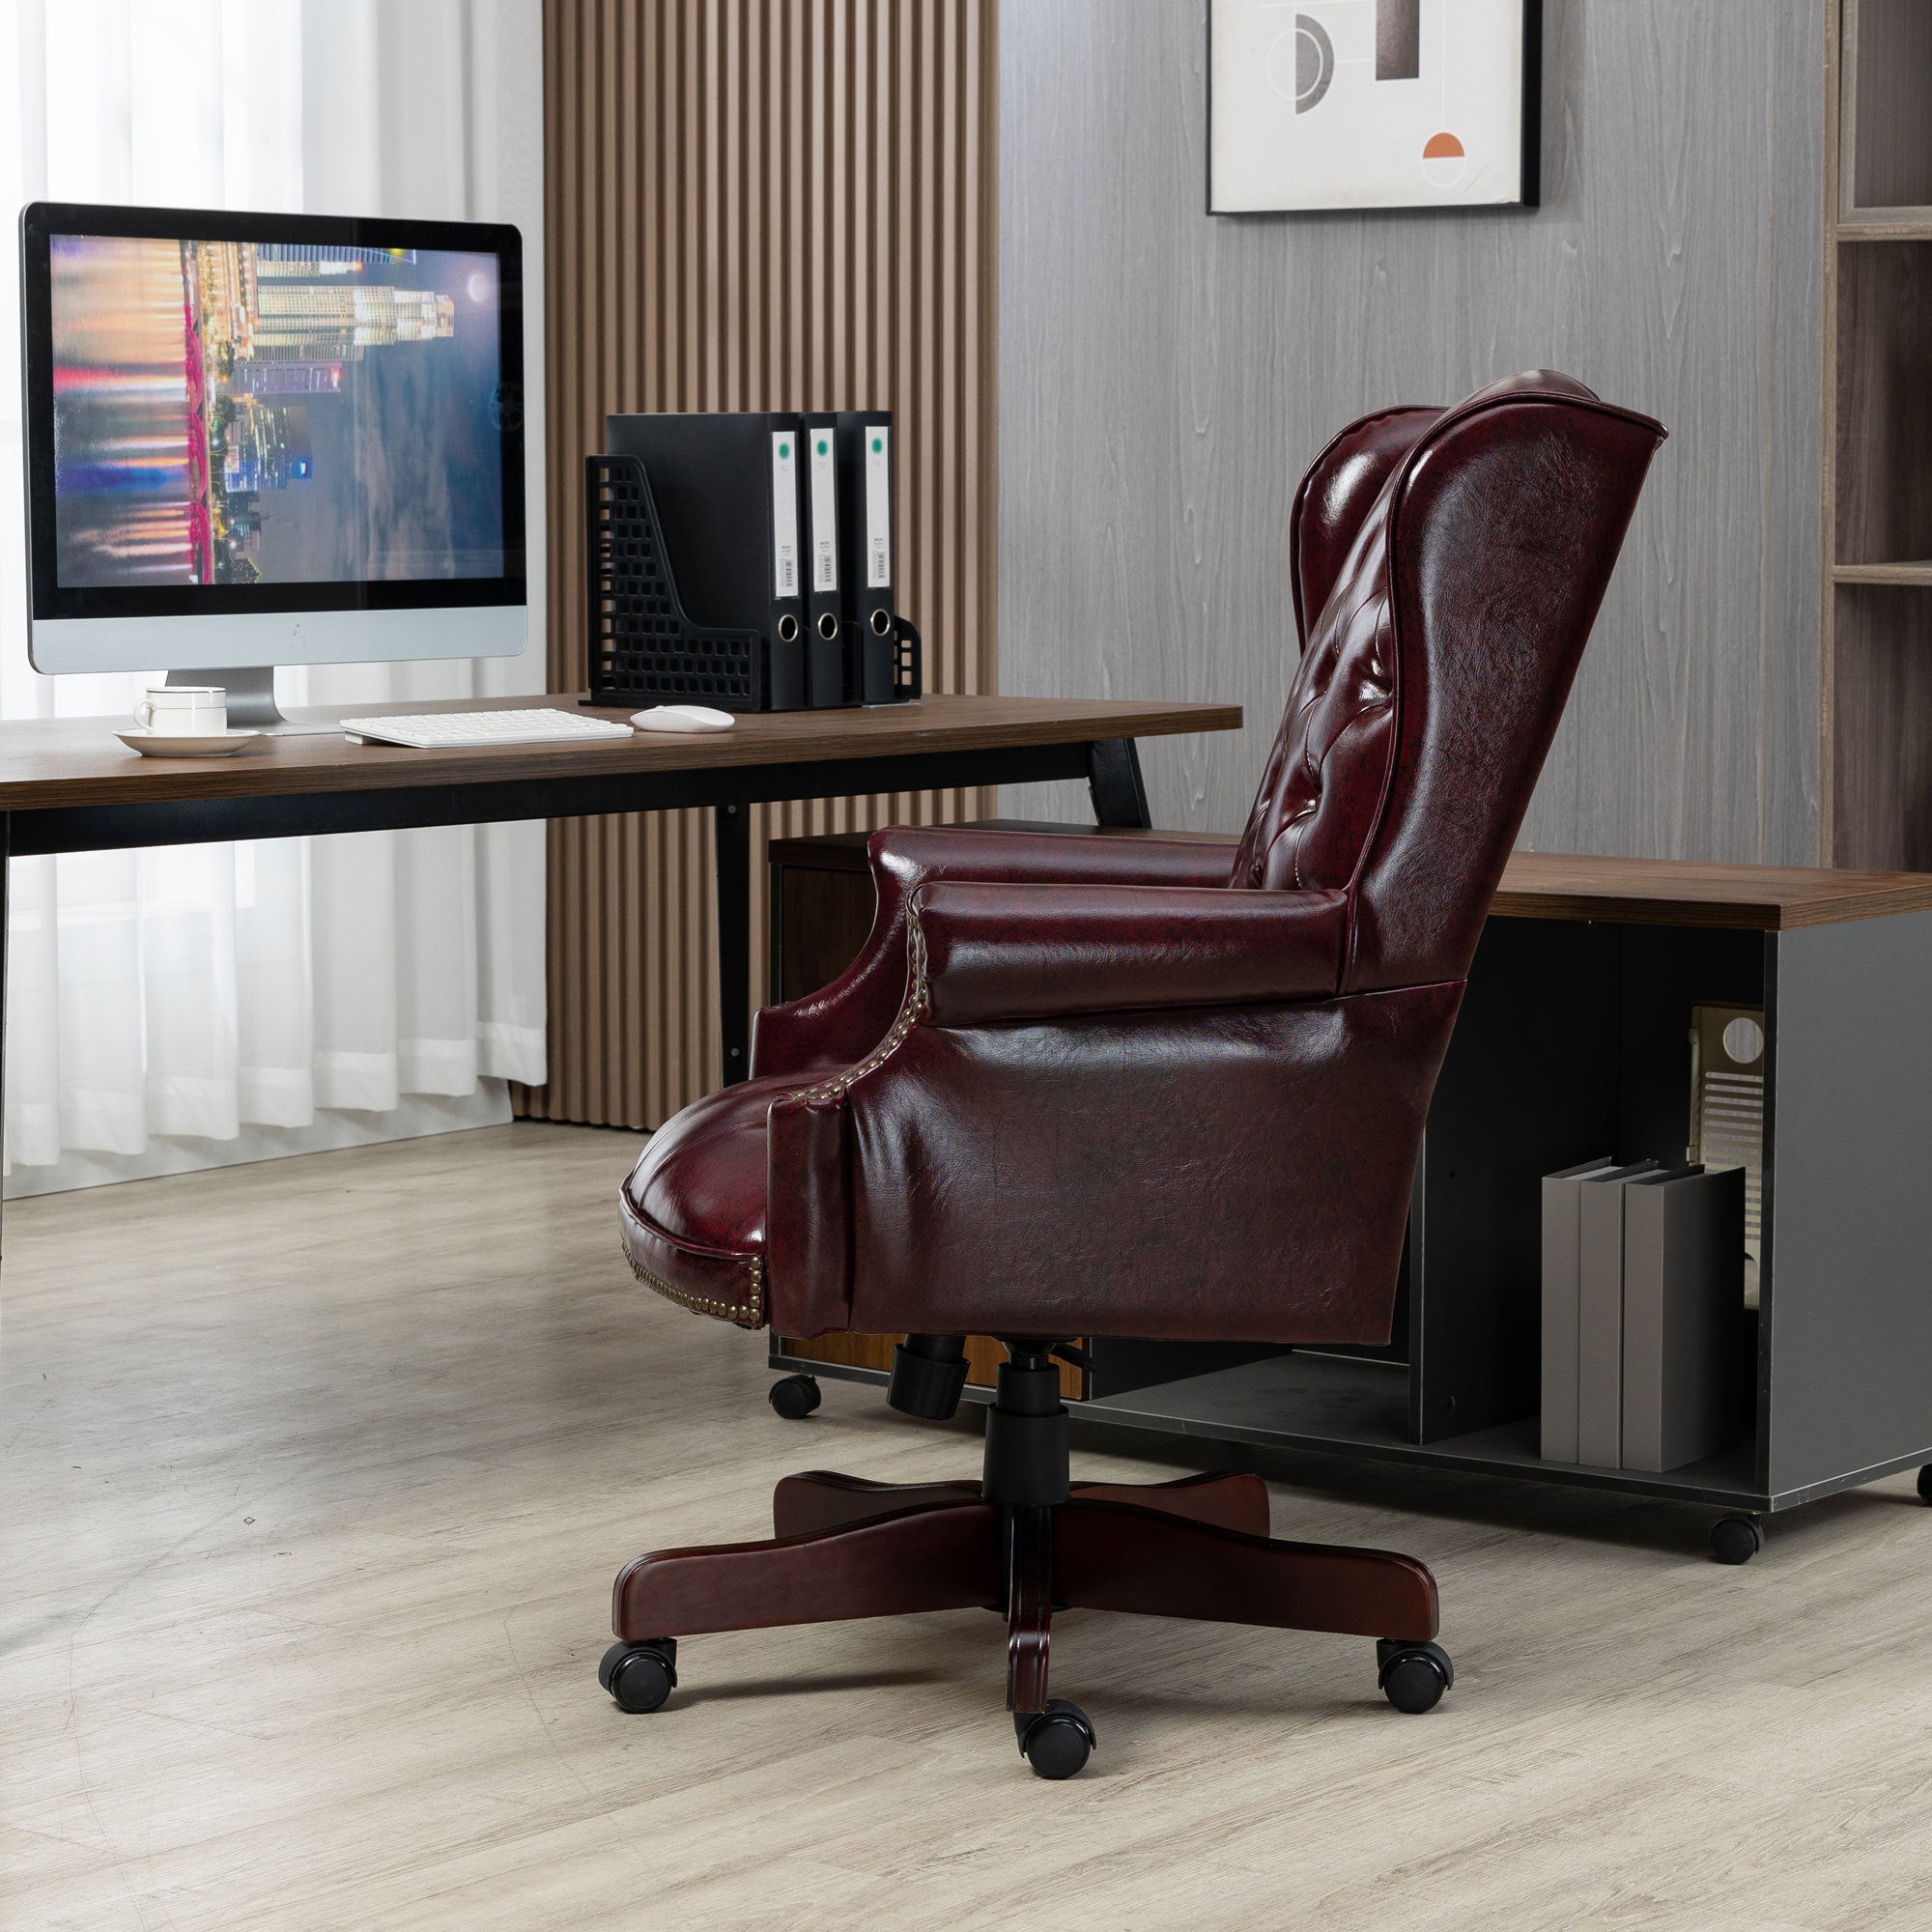 🆓🚛 Executive Office Chair - High Back Reclining Comfortable Desk Chair - Ergonomic Design - Thick Padded Seat and Backrest - Pu Leather Desk Chair With Smooth Glide Caster Wheels, Burgundy